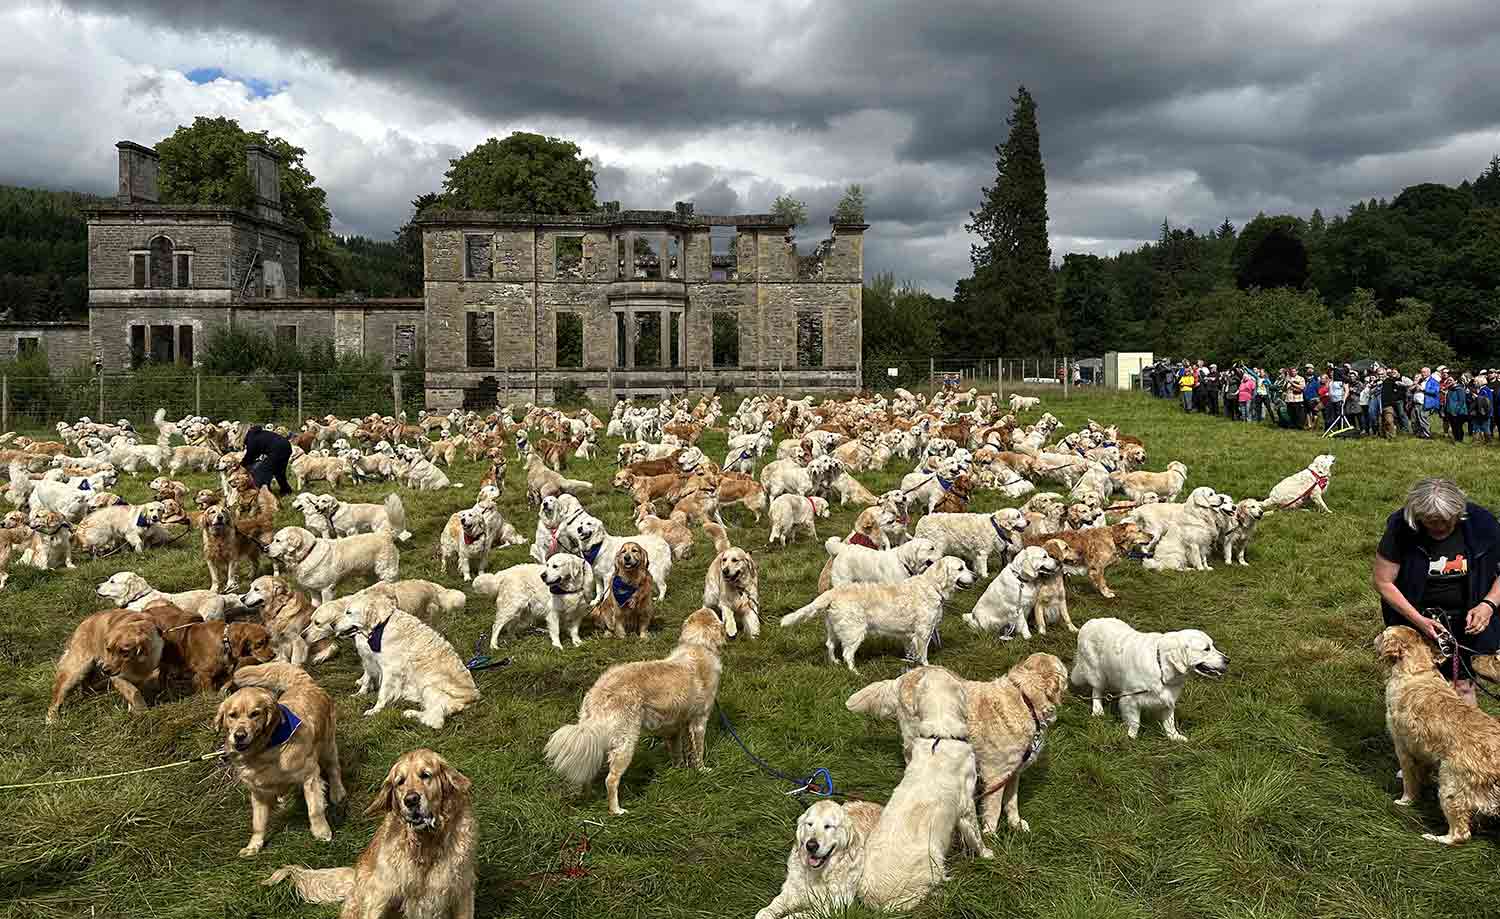 A large number of golden retrievers stand on grass in front of the ruins of a building as people stand to one side taking photos.